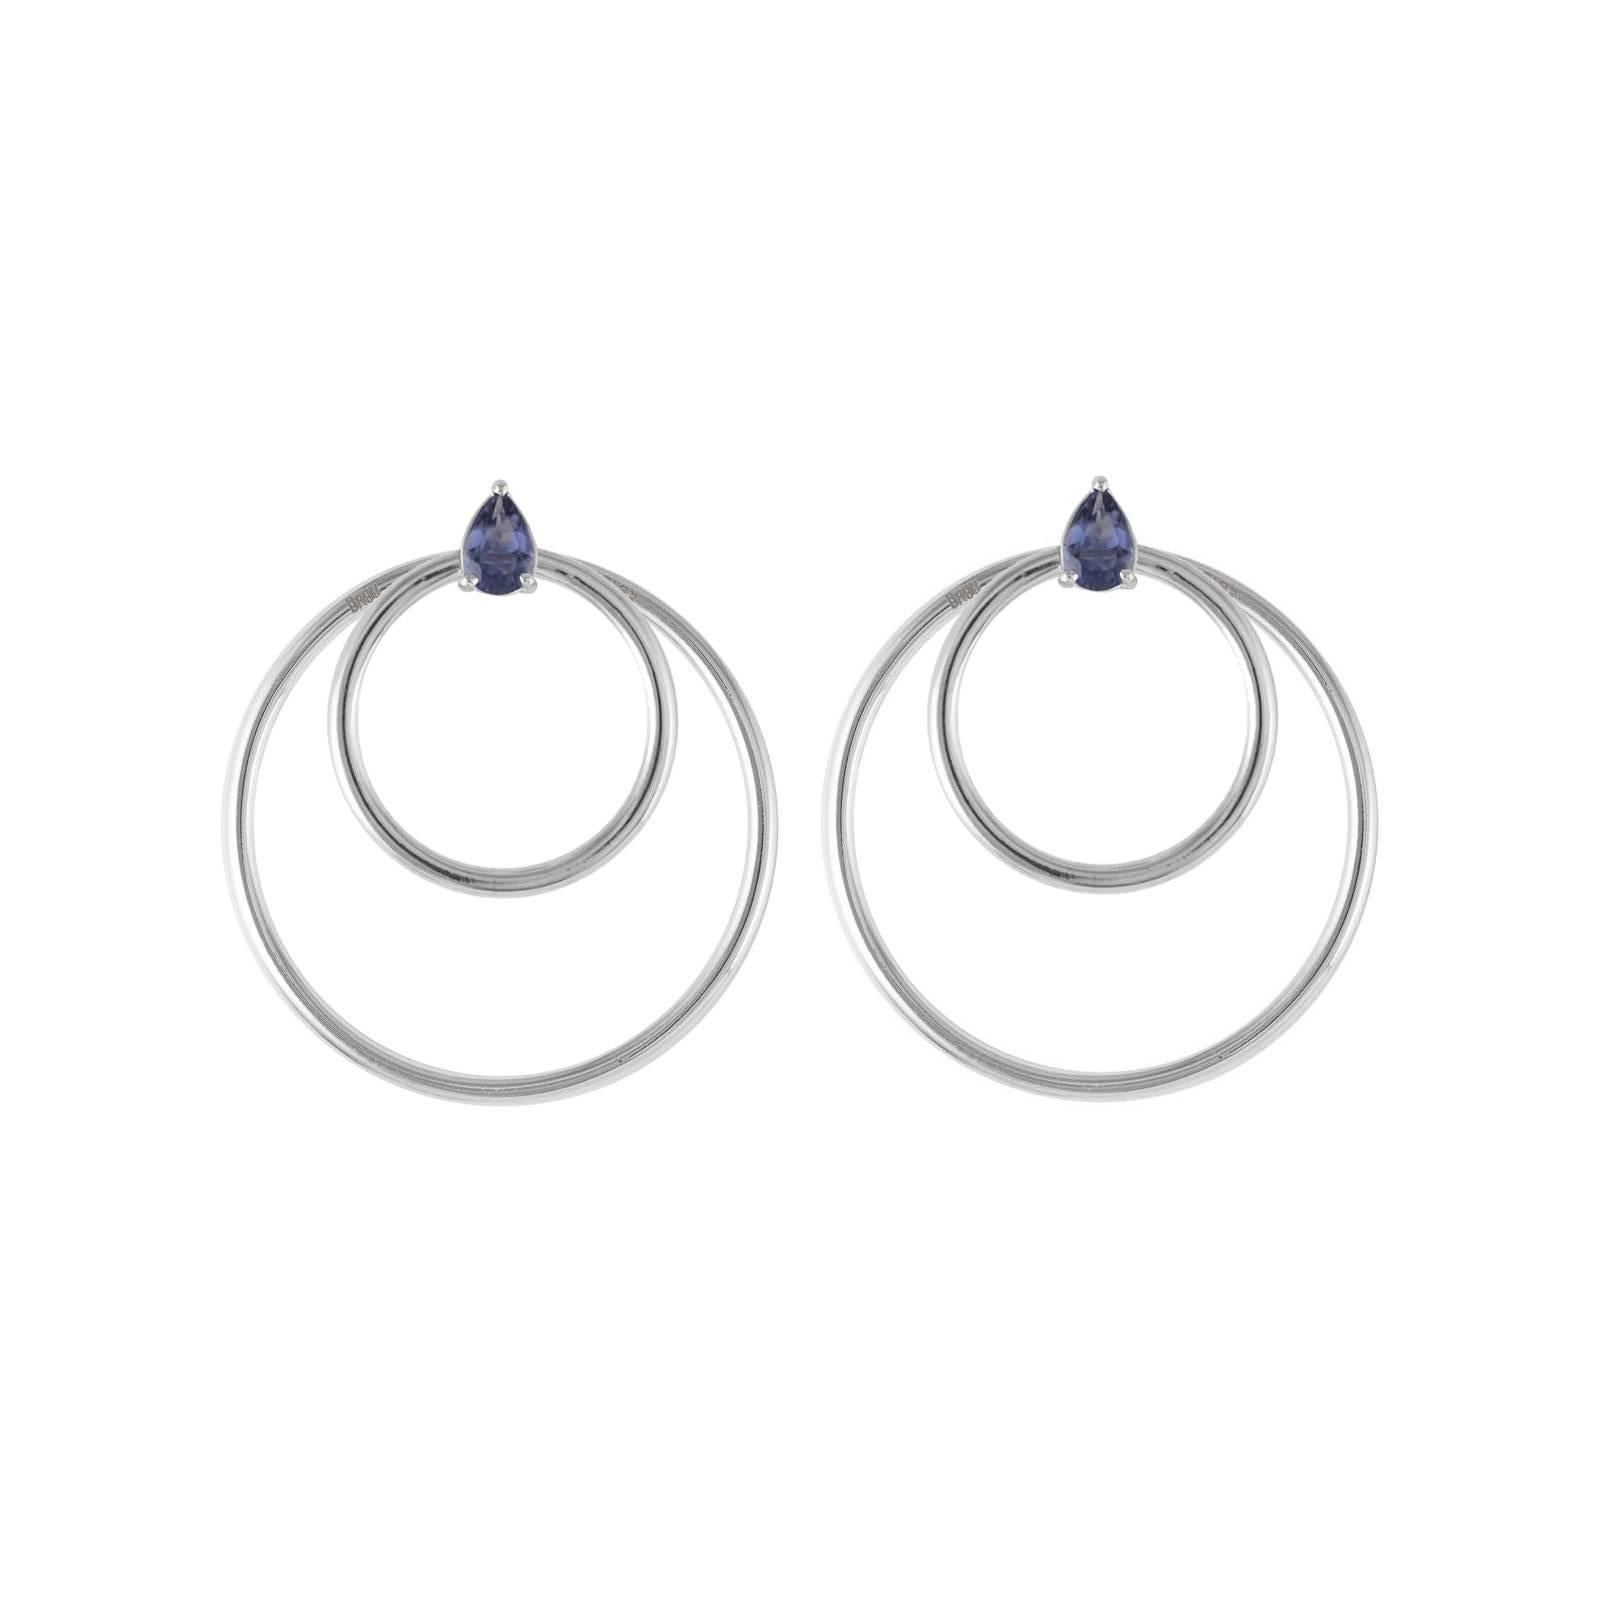 Iolite and white gold small front facing hoop earrings. Simple chic earrings set with pear cut iolite gemstones in 18 karat white gold. Perfectly geometrically balanced to be pleasingly elegant and flattering. A perfect complement to the Quanta